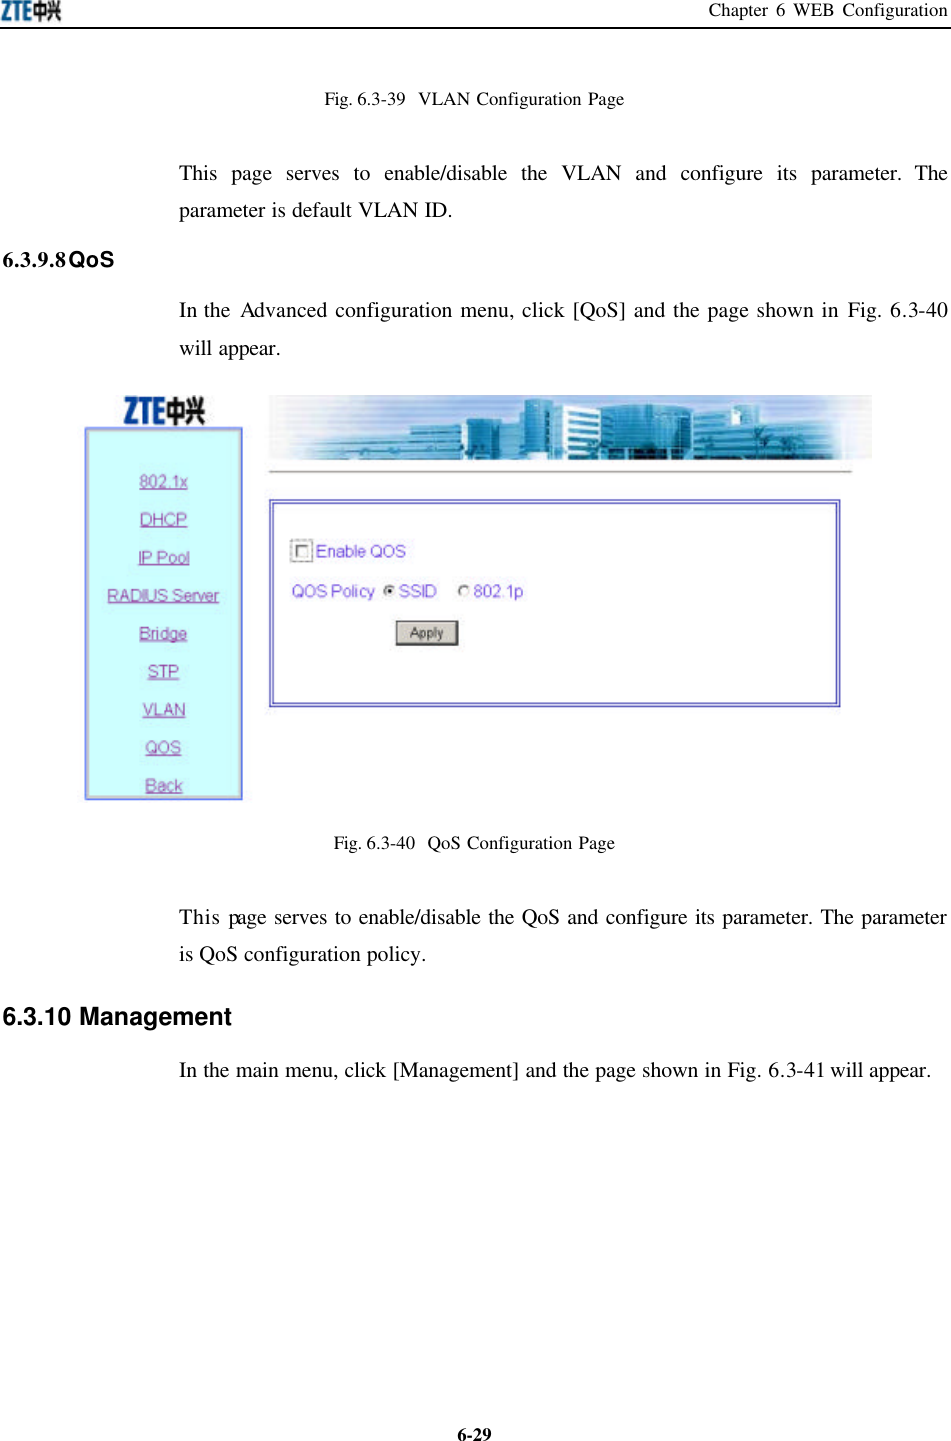 Chapter 6 WEB Configuration  6-29Fig. 6.3-39  VLAN Configuration Page   This page serves to enable/disable the VLAN and configure its parameter. The parameter is default VLAN ID.   6.3.9.8 QoS In the Advanced configuration menu, click [QoS] and the page shown in Fig. 6.3-40 will appear.    Fig. 6.3-40  QoS Configuration Page   This page serves to enable/disable the QoS and configure its parameter. The parameter is QoS configuration policy.   6.3.10 Management   In the main menu, click [Management] and the page shown in Fig. 6.3-41 will appear.   